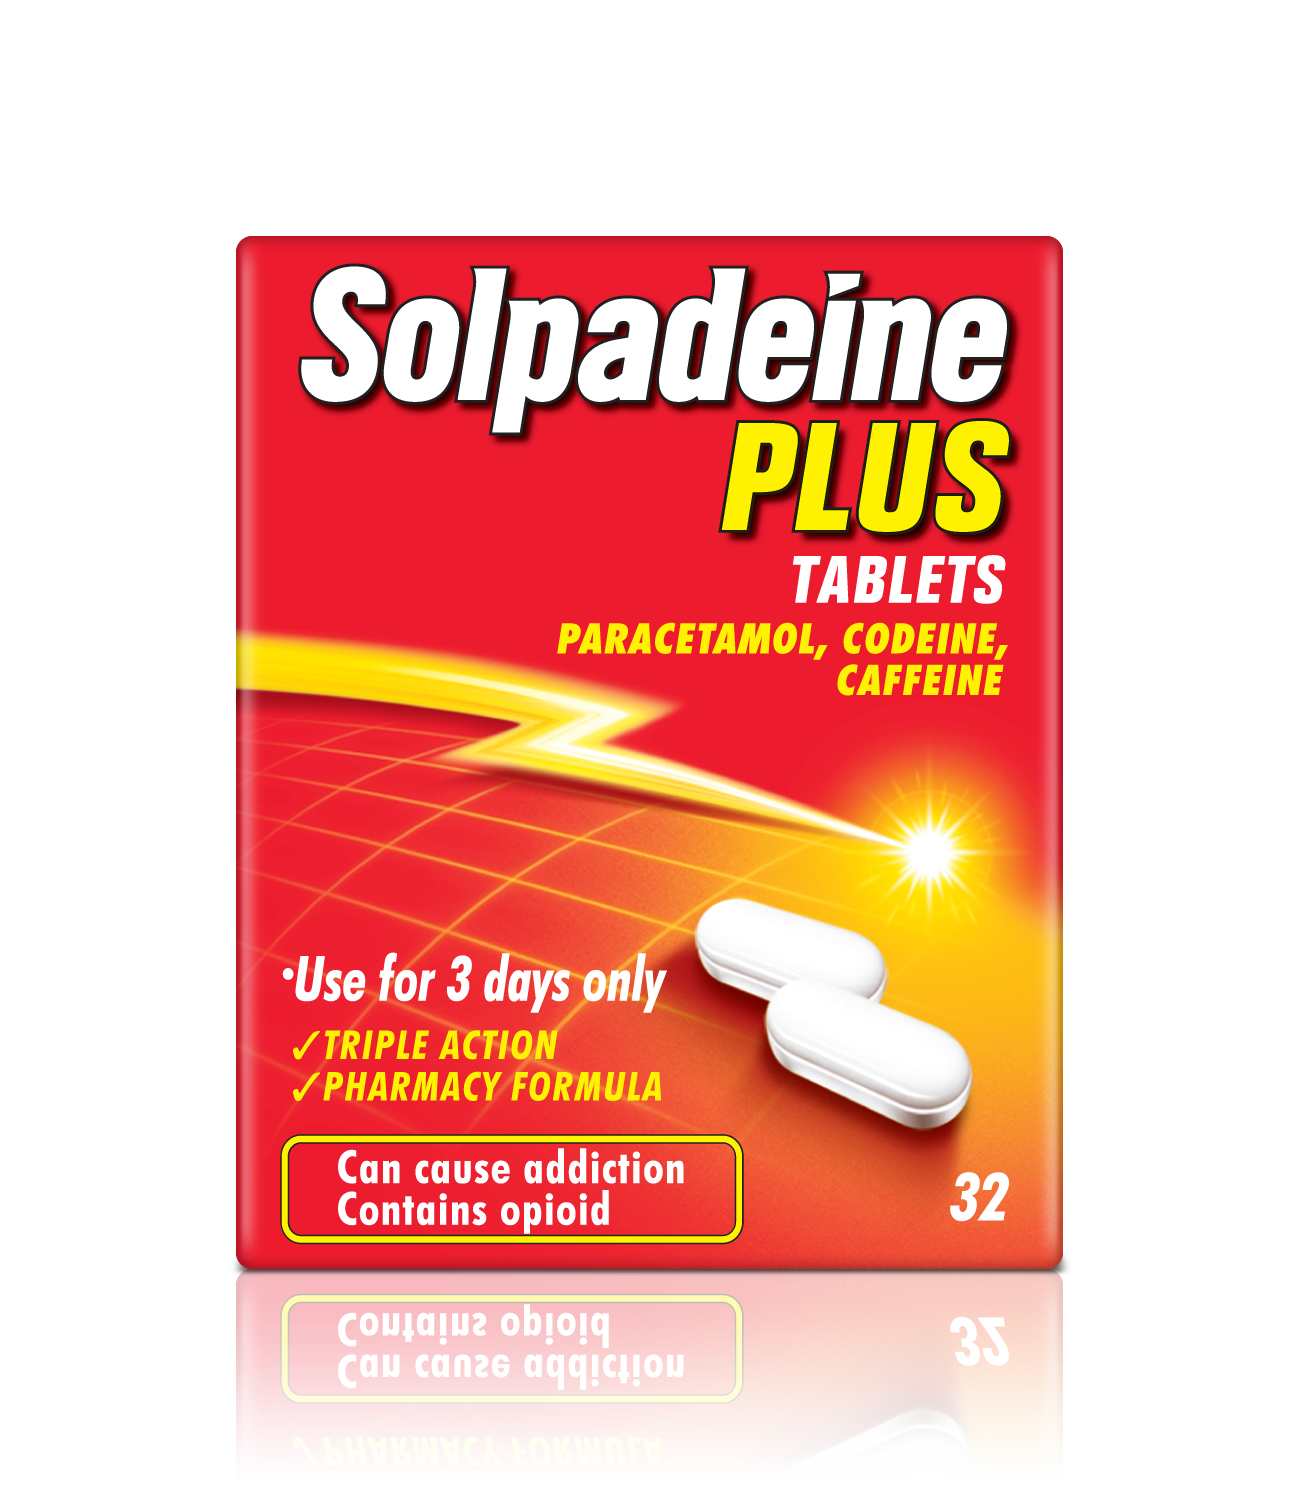 Solpadeine PLUS tablets product packaging